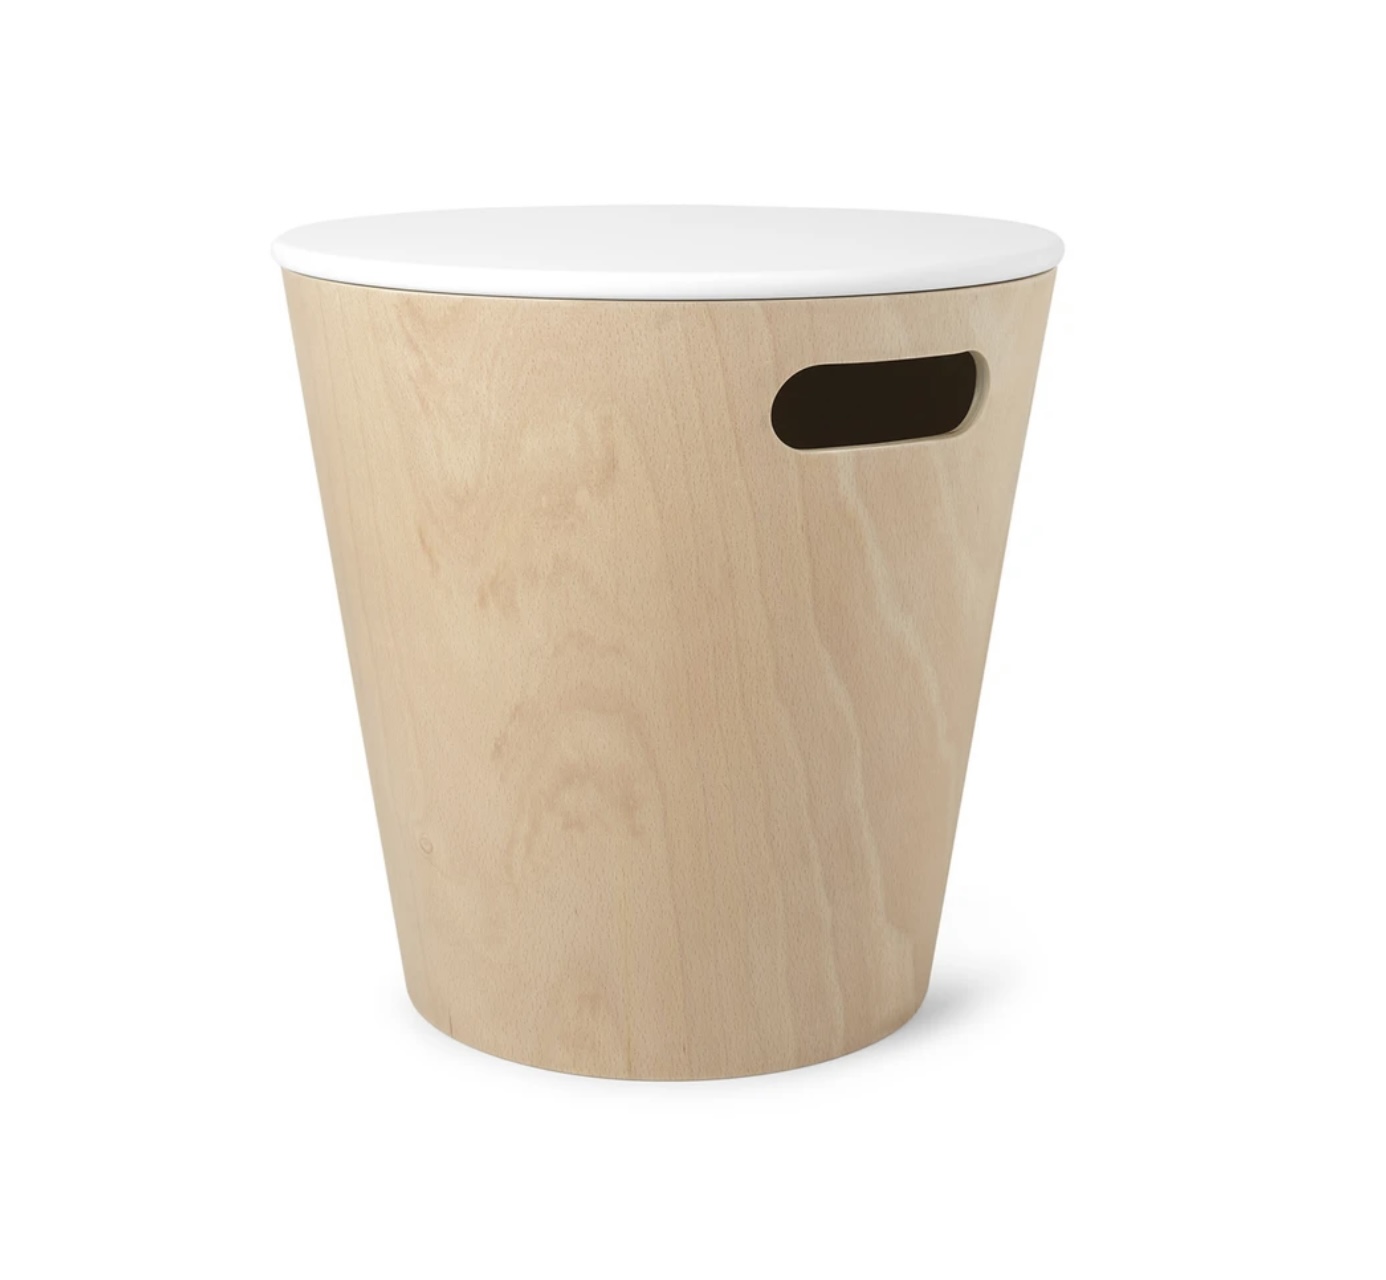 Umbra Woodrow Storage Stool In White and Natural Wood